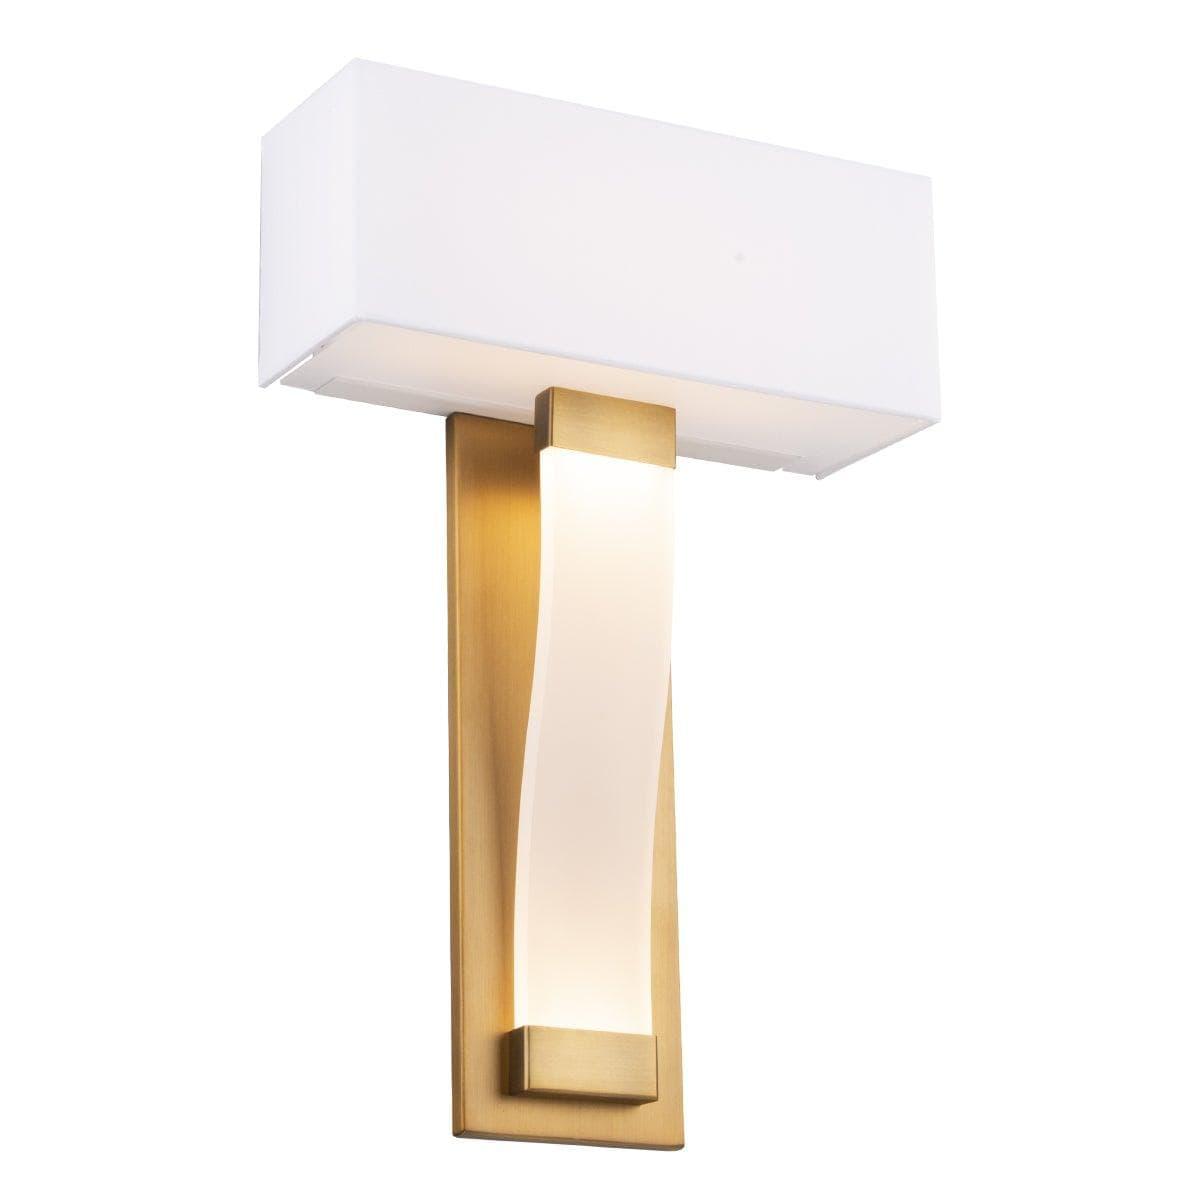 Modern Forms - Diplomat LED Wall Sconce - WS-70018-AB | Montreal Lighting & Hardware